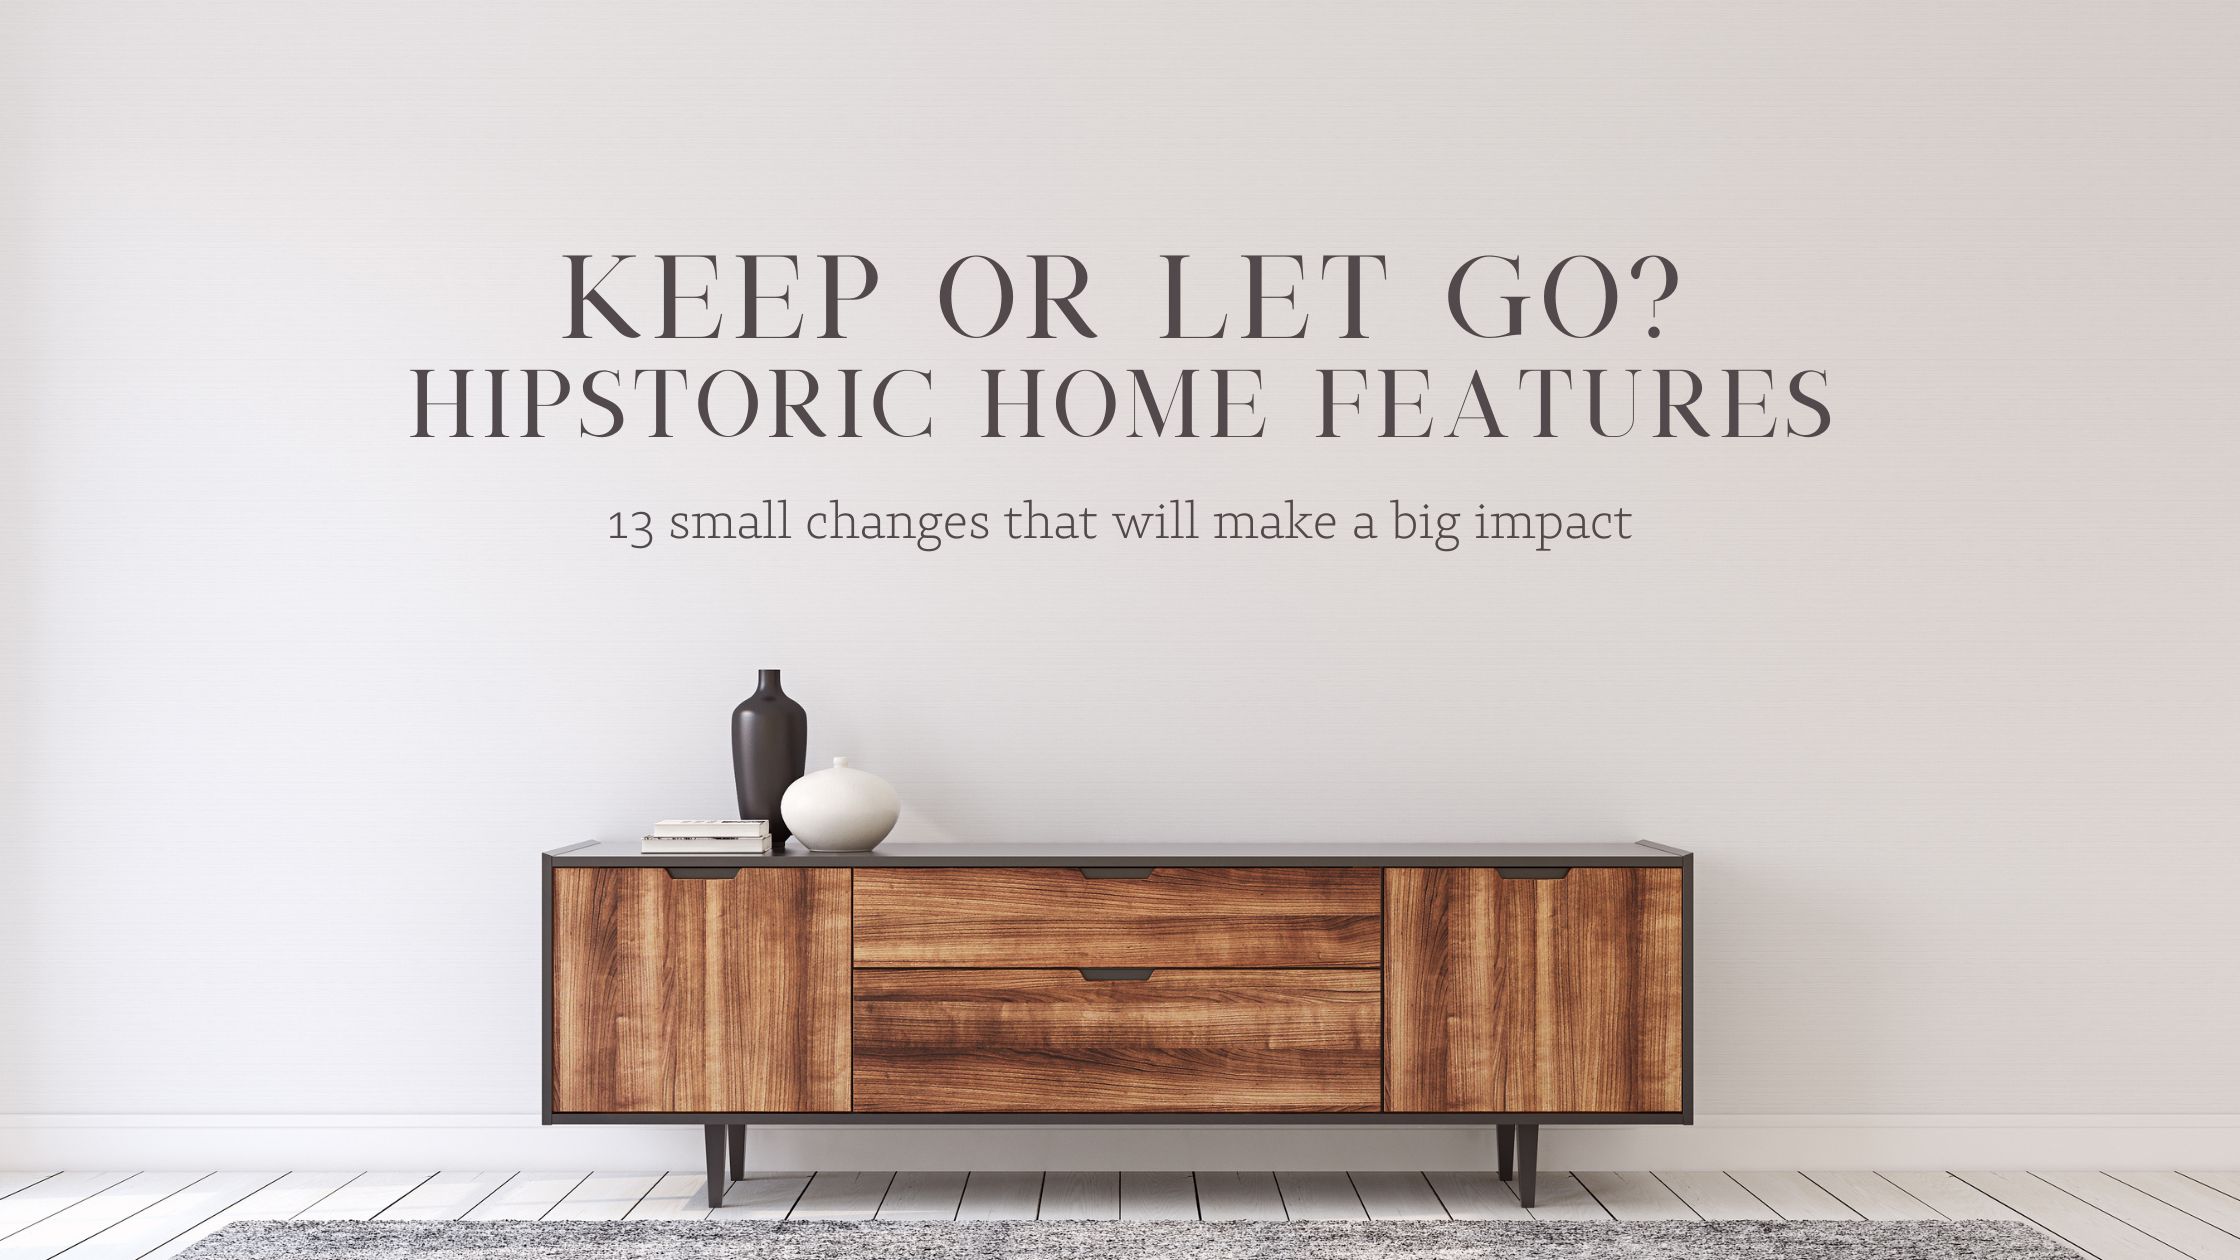 13 Hipstoric Home Features: Keep or Let Go?